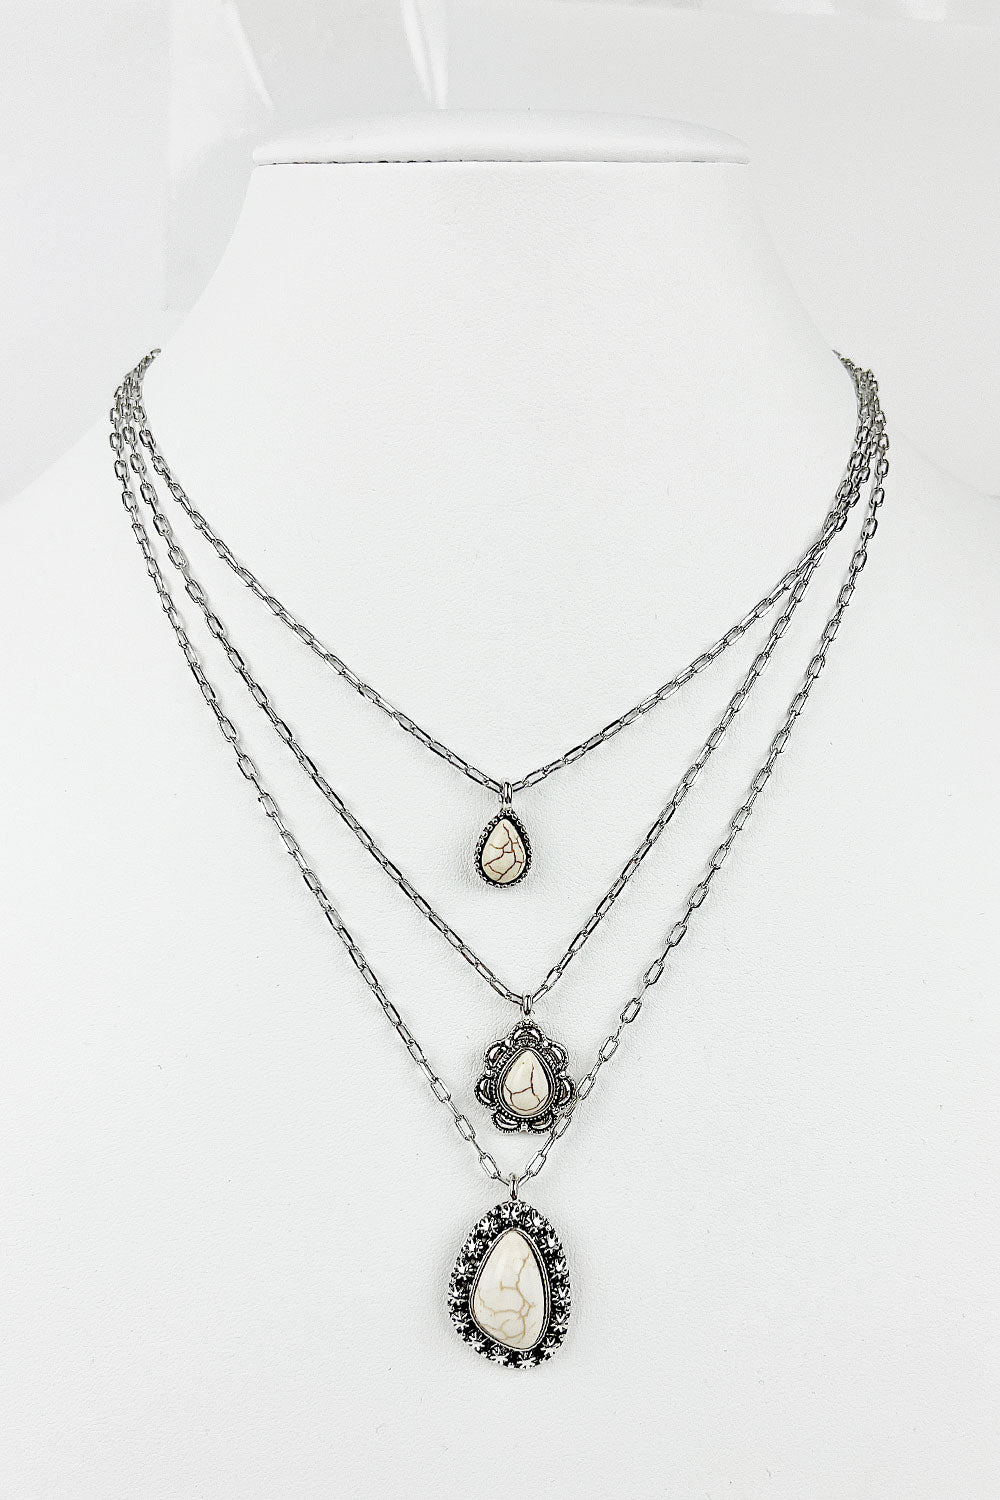 WESTERN STYLE 3 LAYERED PENDANT NECKLACE